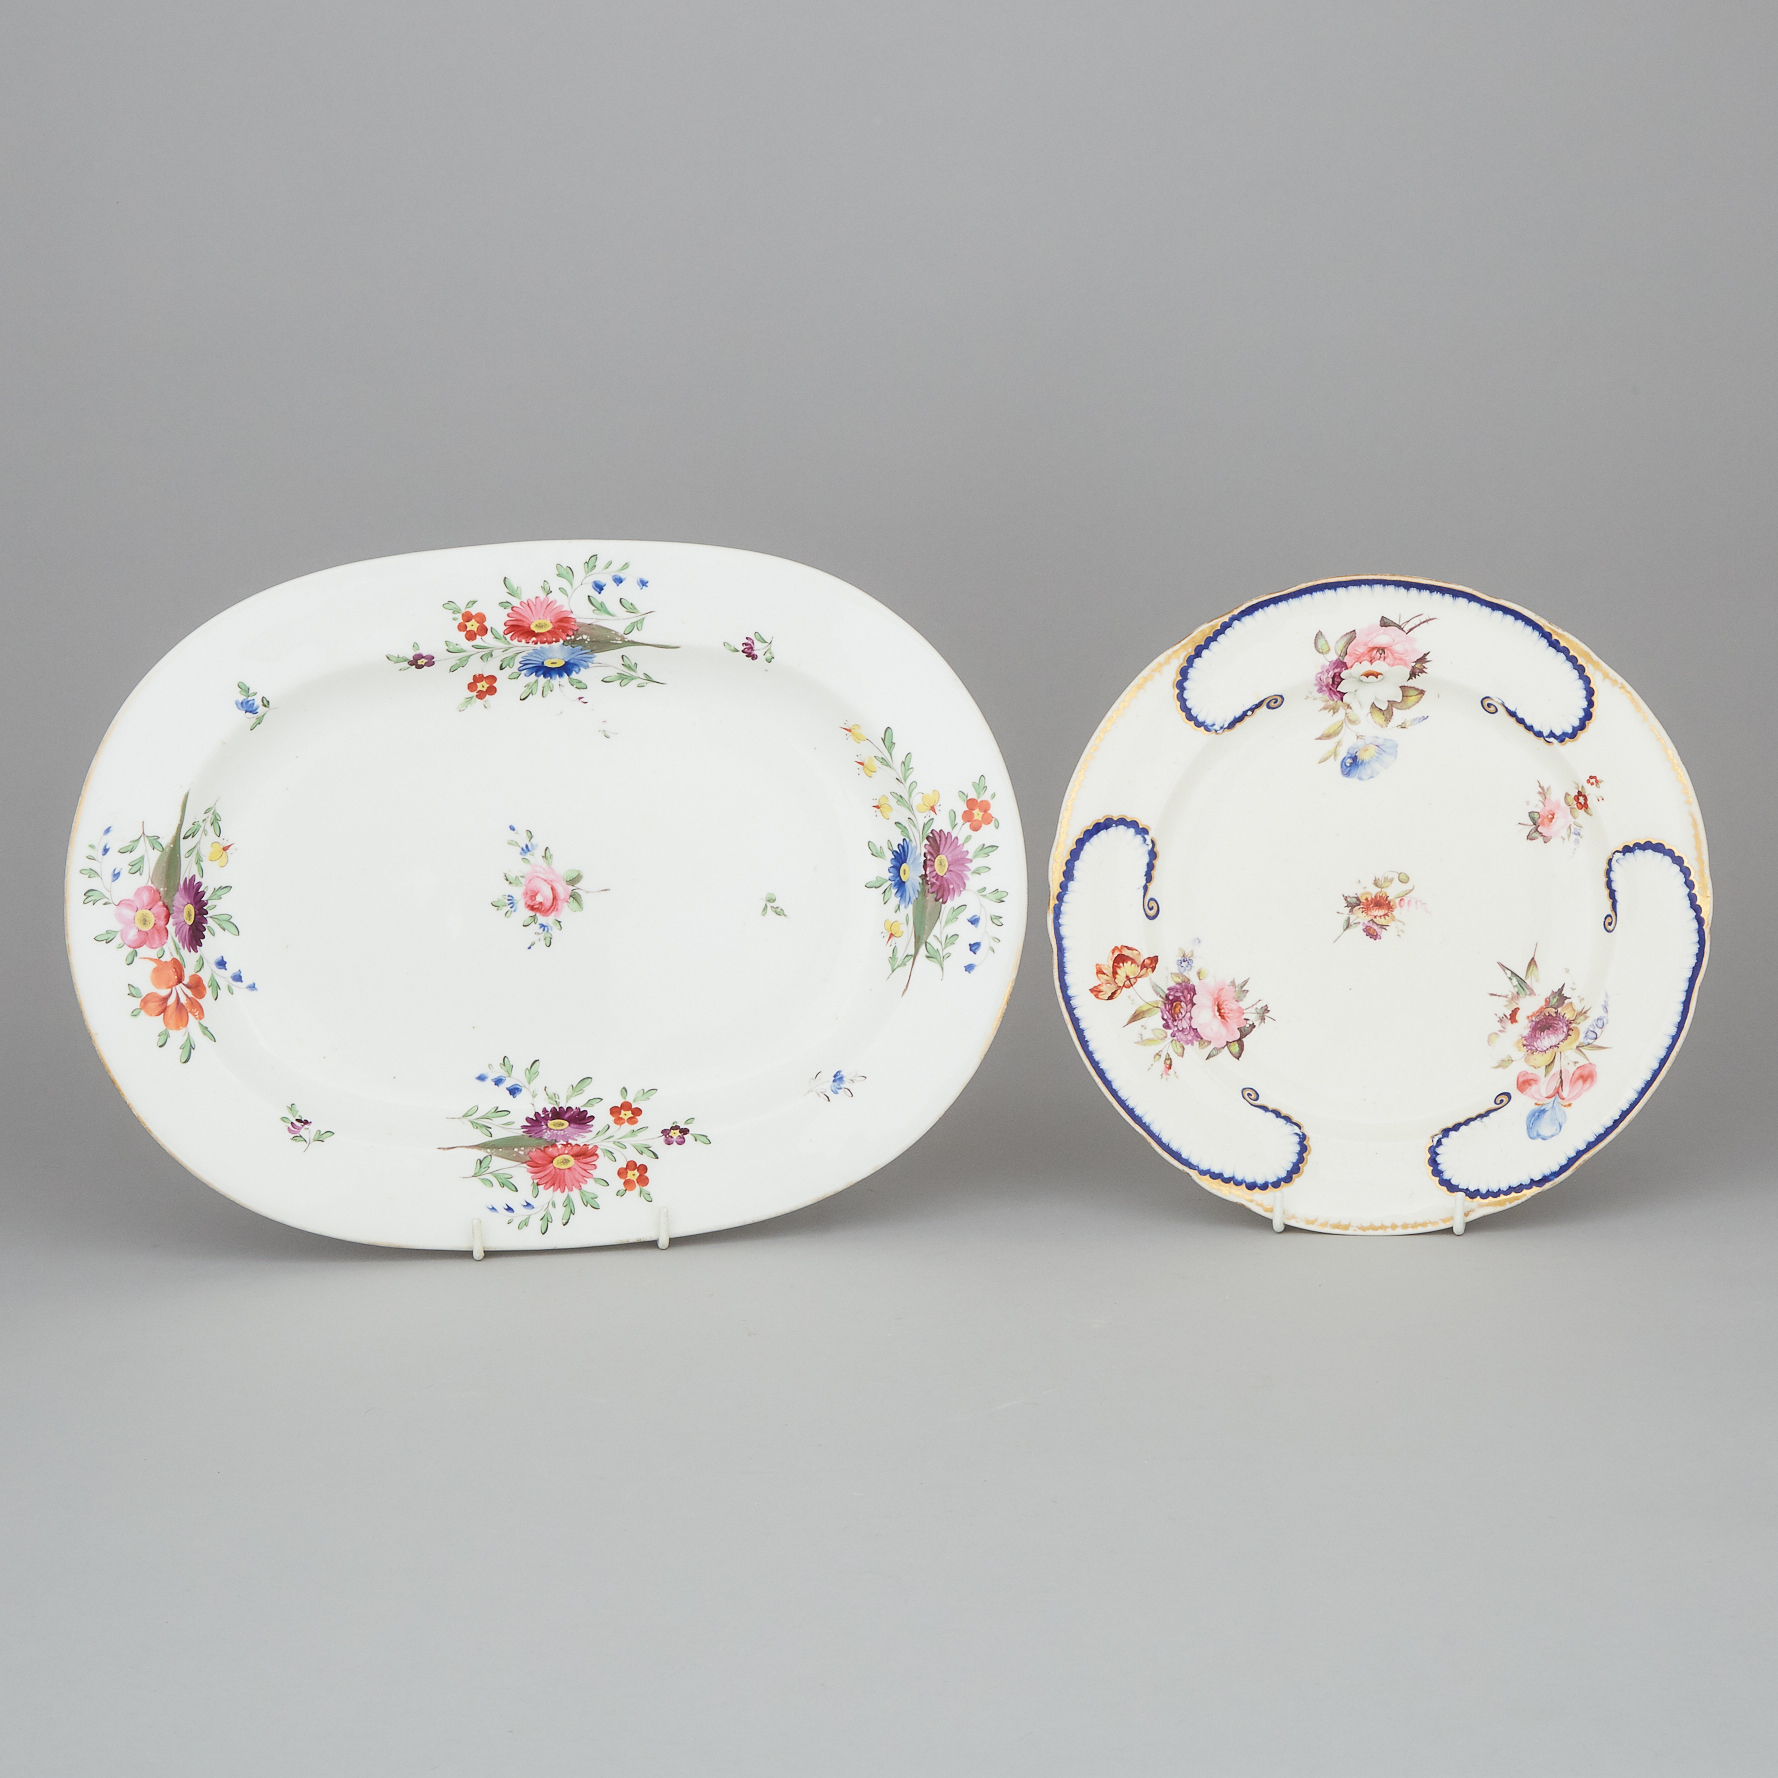 Derby Oval Platter and Plate, early 19th century